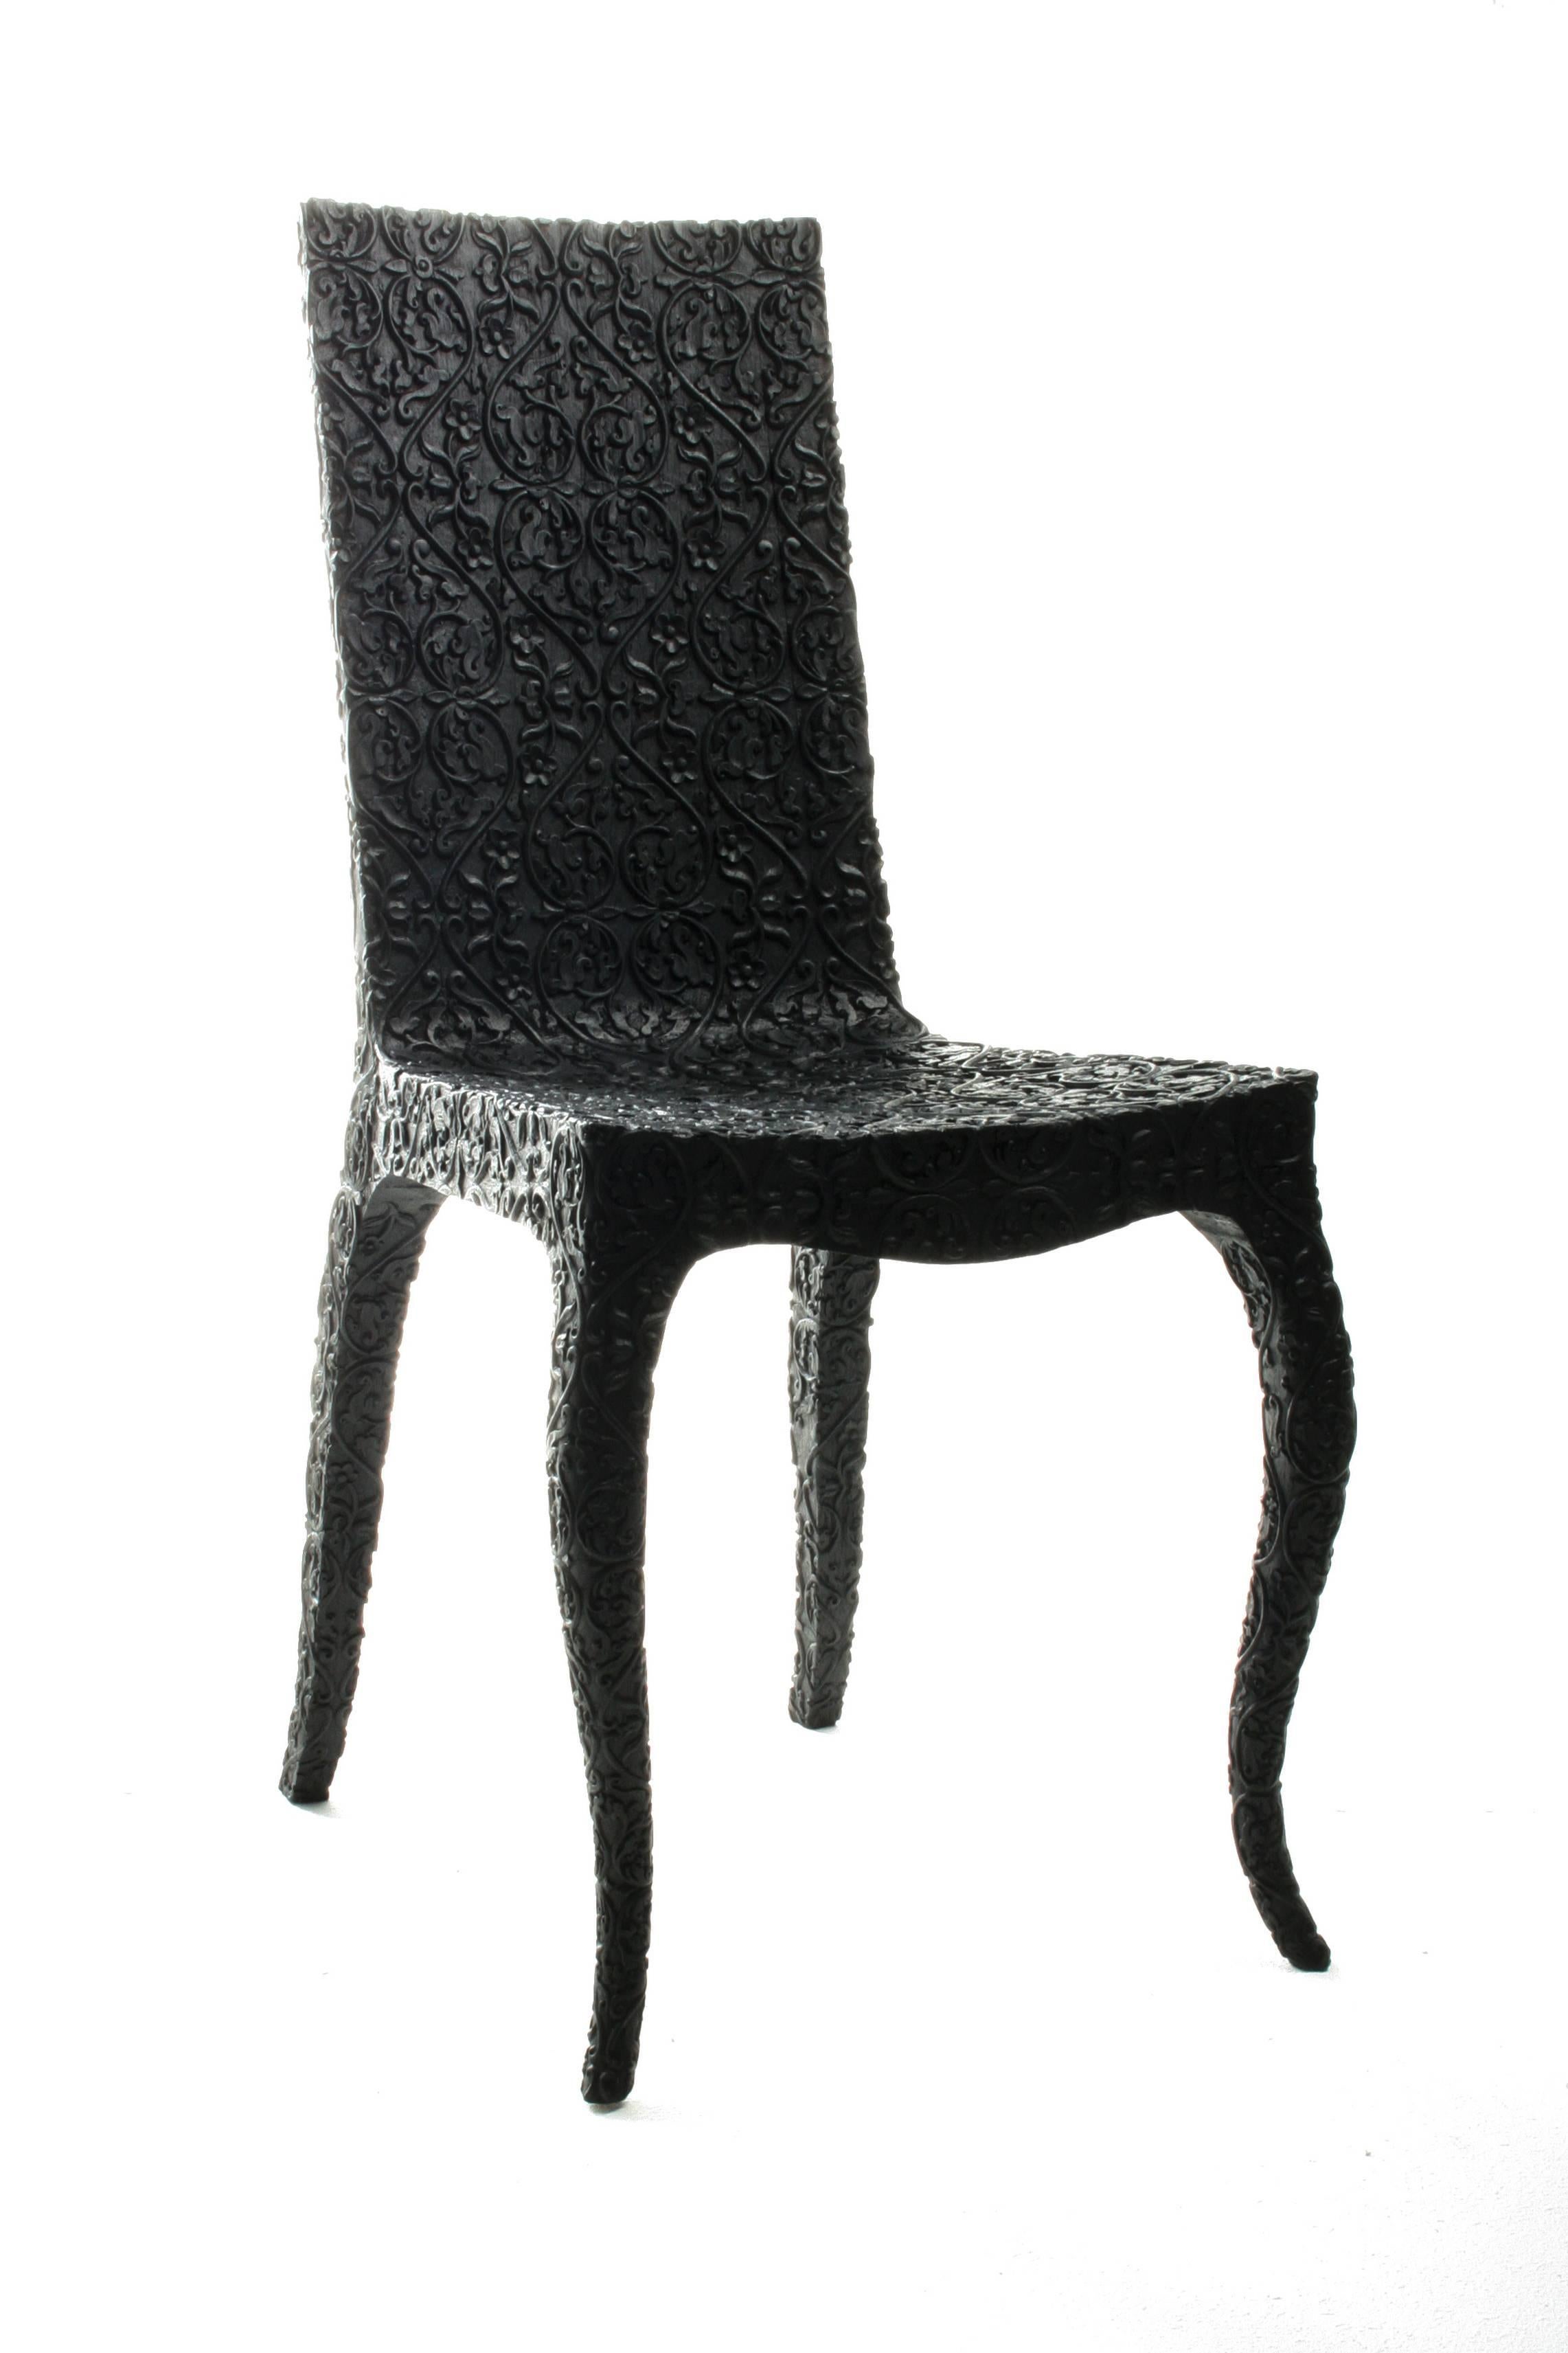 Dutch Carved Chair by Marcel Wanders For Sale